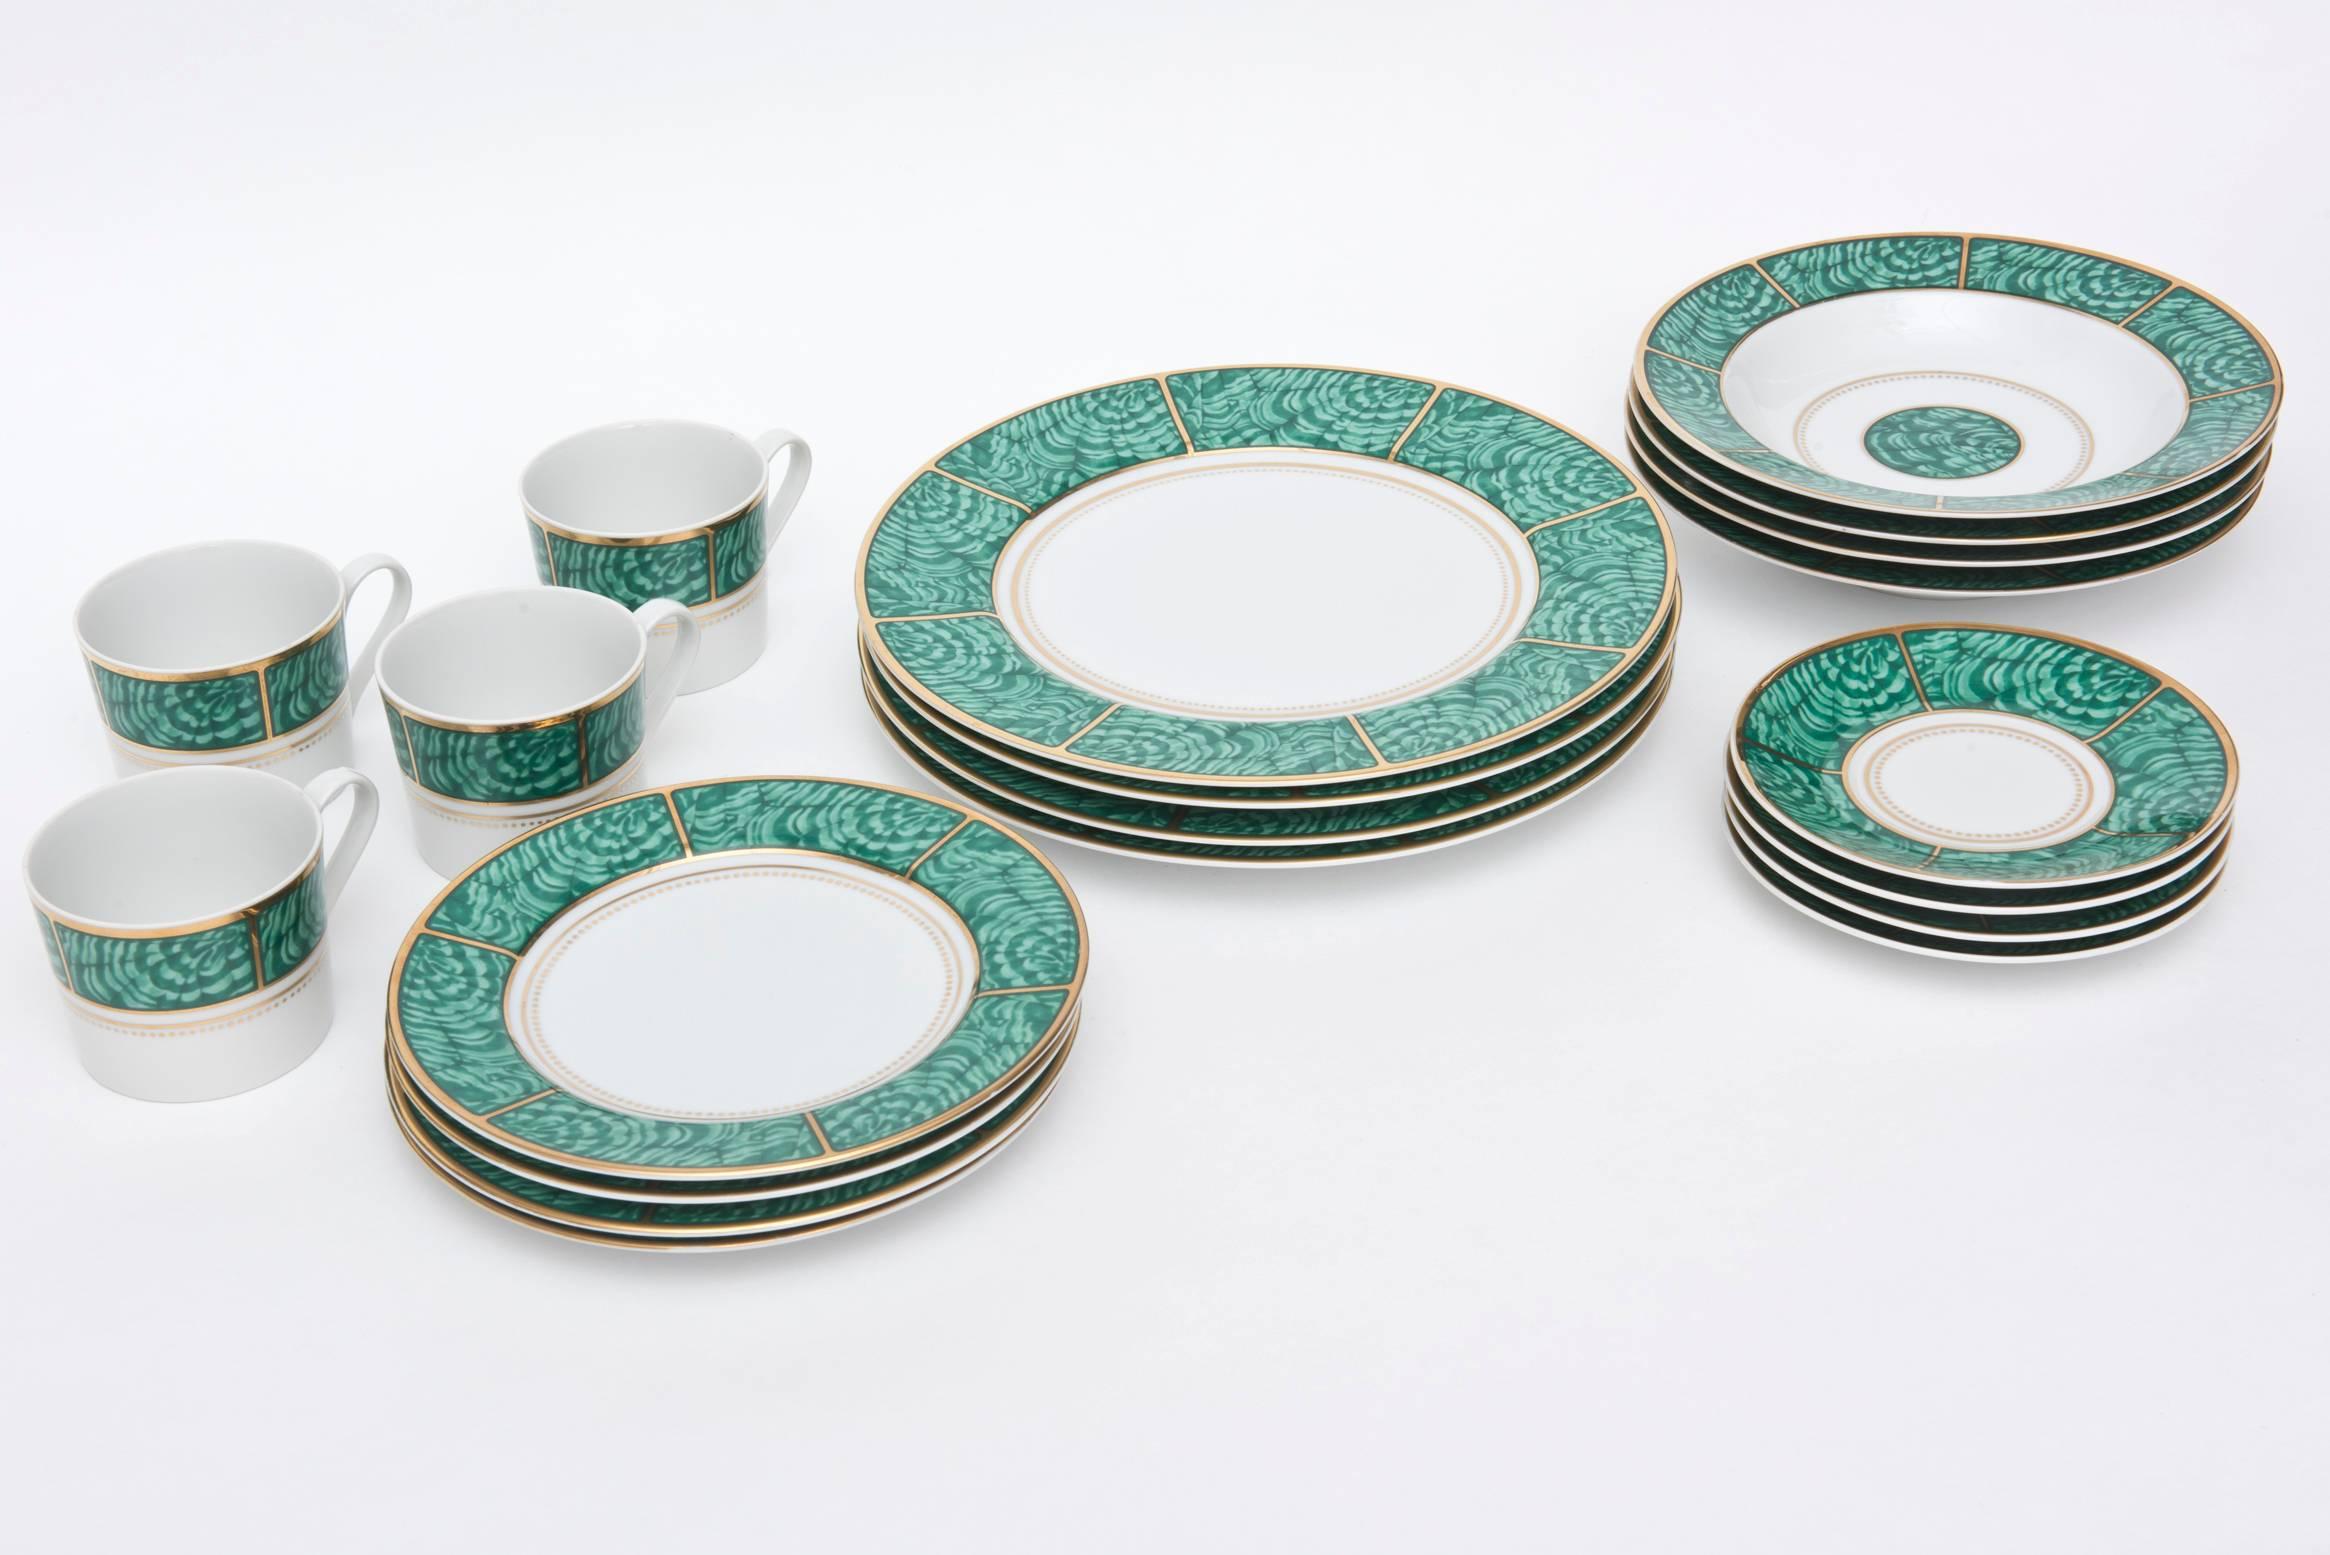 Gold Georges Briard Imperial Malachite Porcelain China Service for Four Vintage